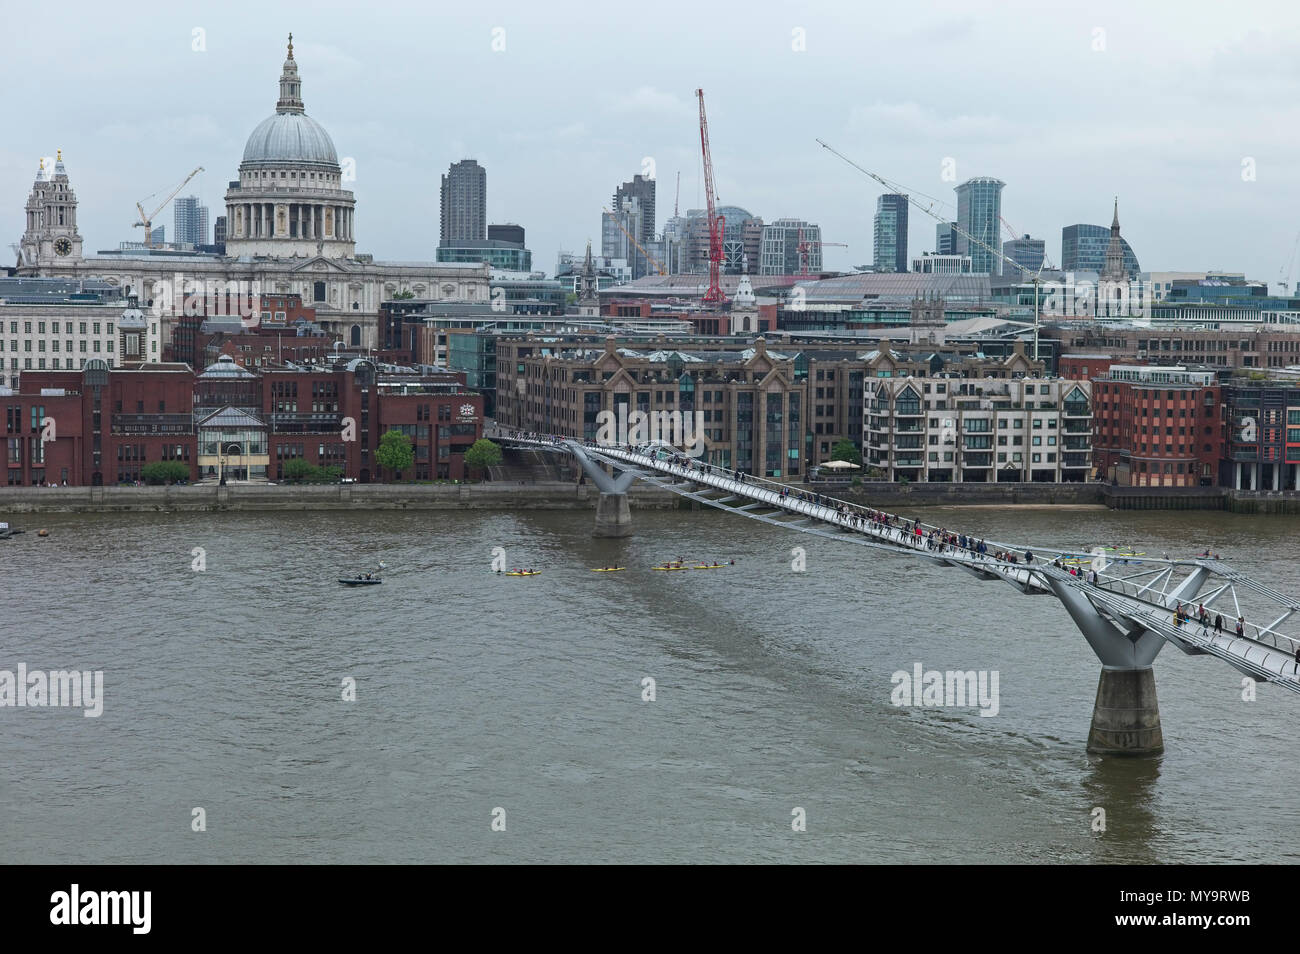 River Thames in London showing a flotilla of canoes passing under the Millennium bridge Stock Photo